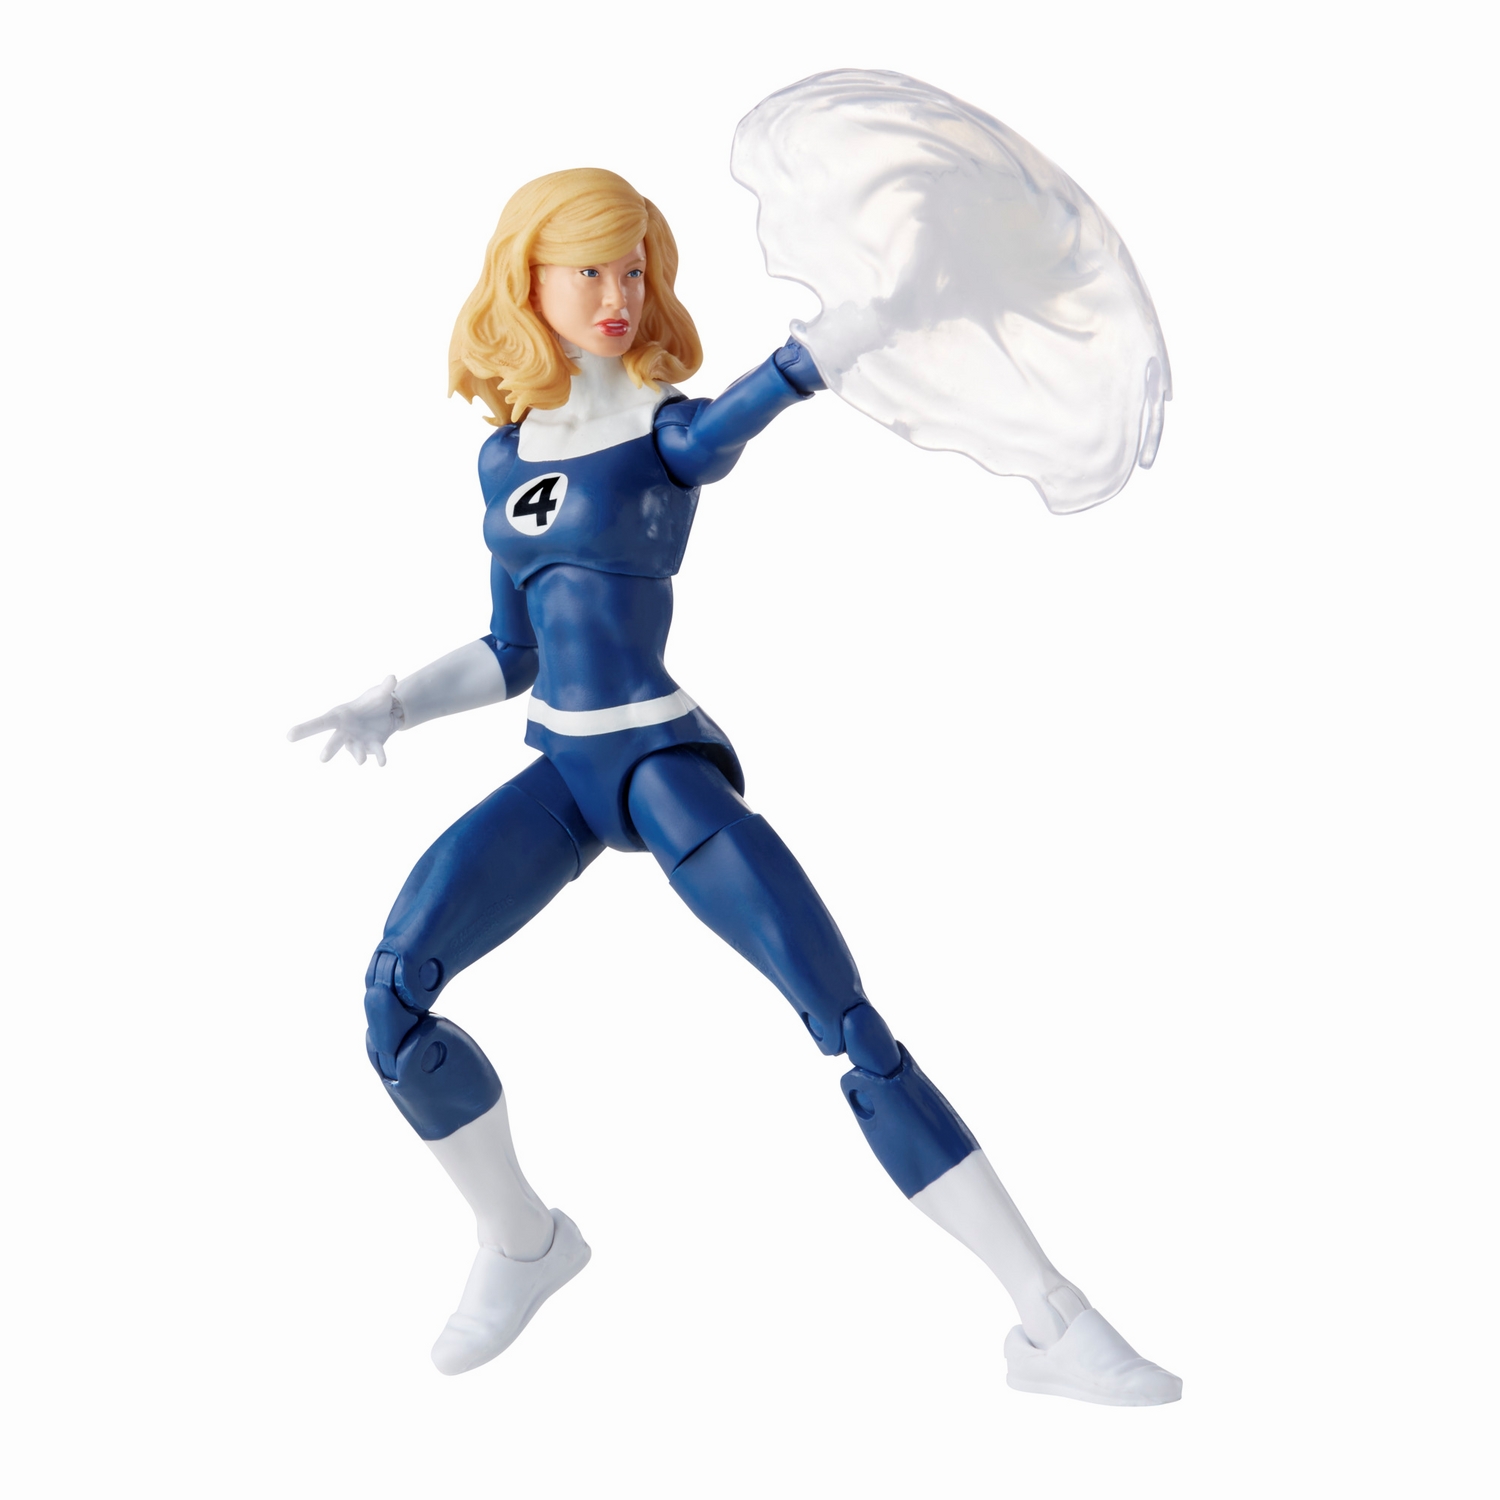 MARVEL LEGENDS SERIES 6-INCH RETRO FANTASTIC FOUR MARVEL'S INVISIBLE WOMAN Figure_oop 4.jpg